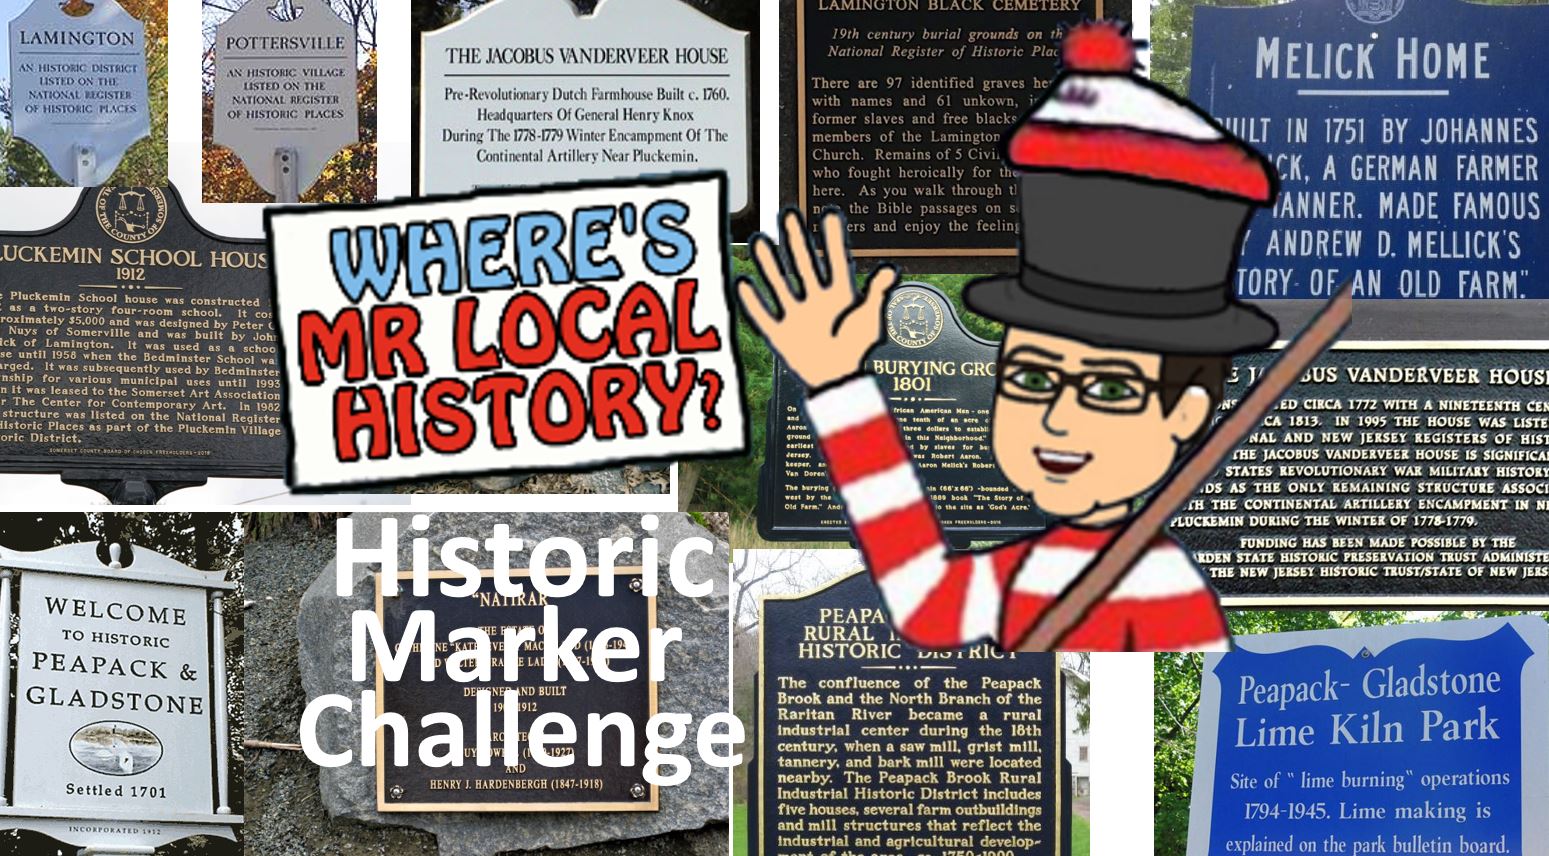 It's the Mr. Local History Historic Marker Challenge